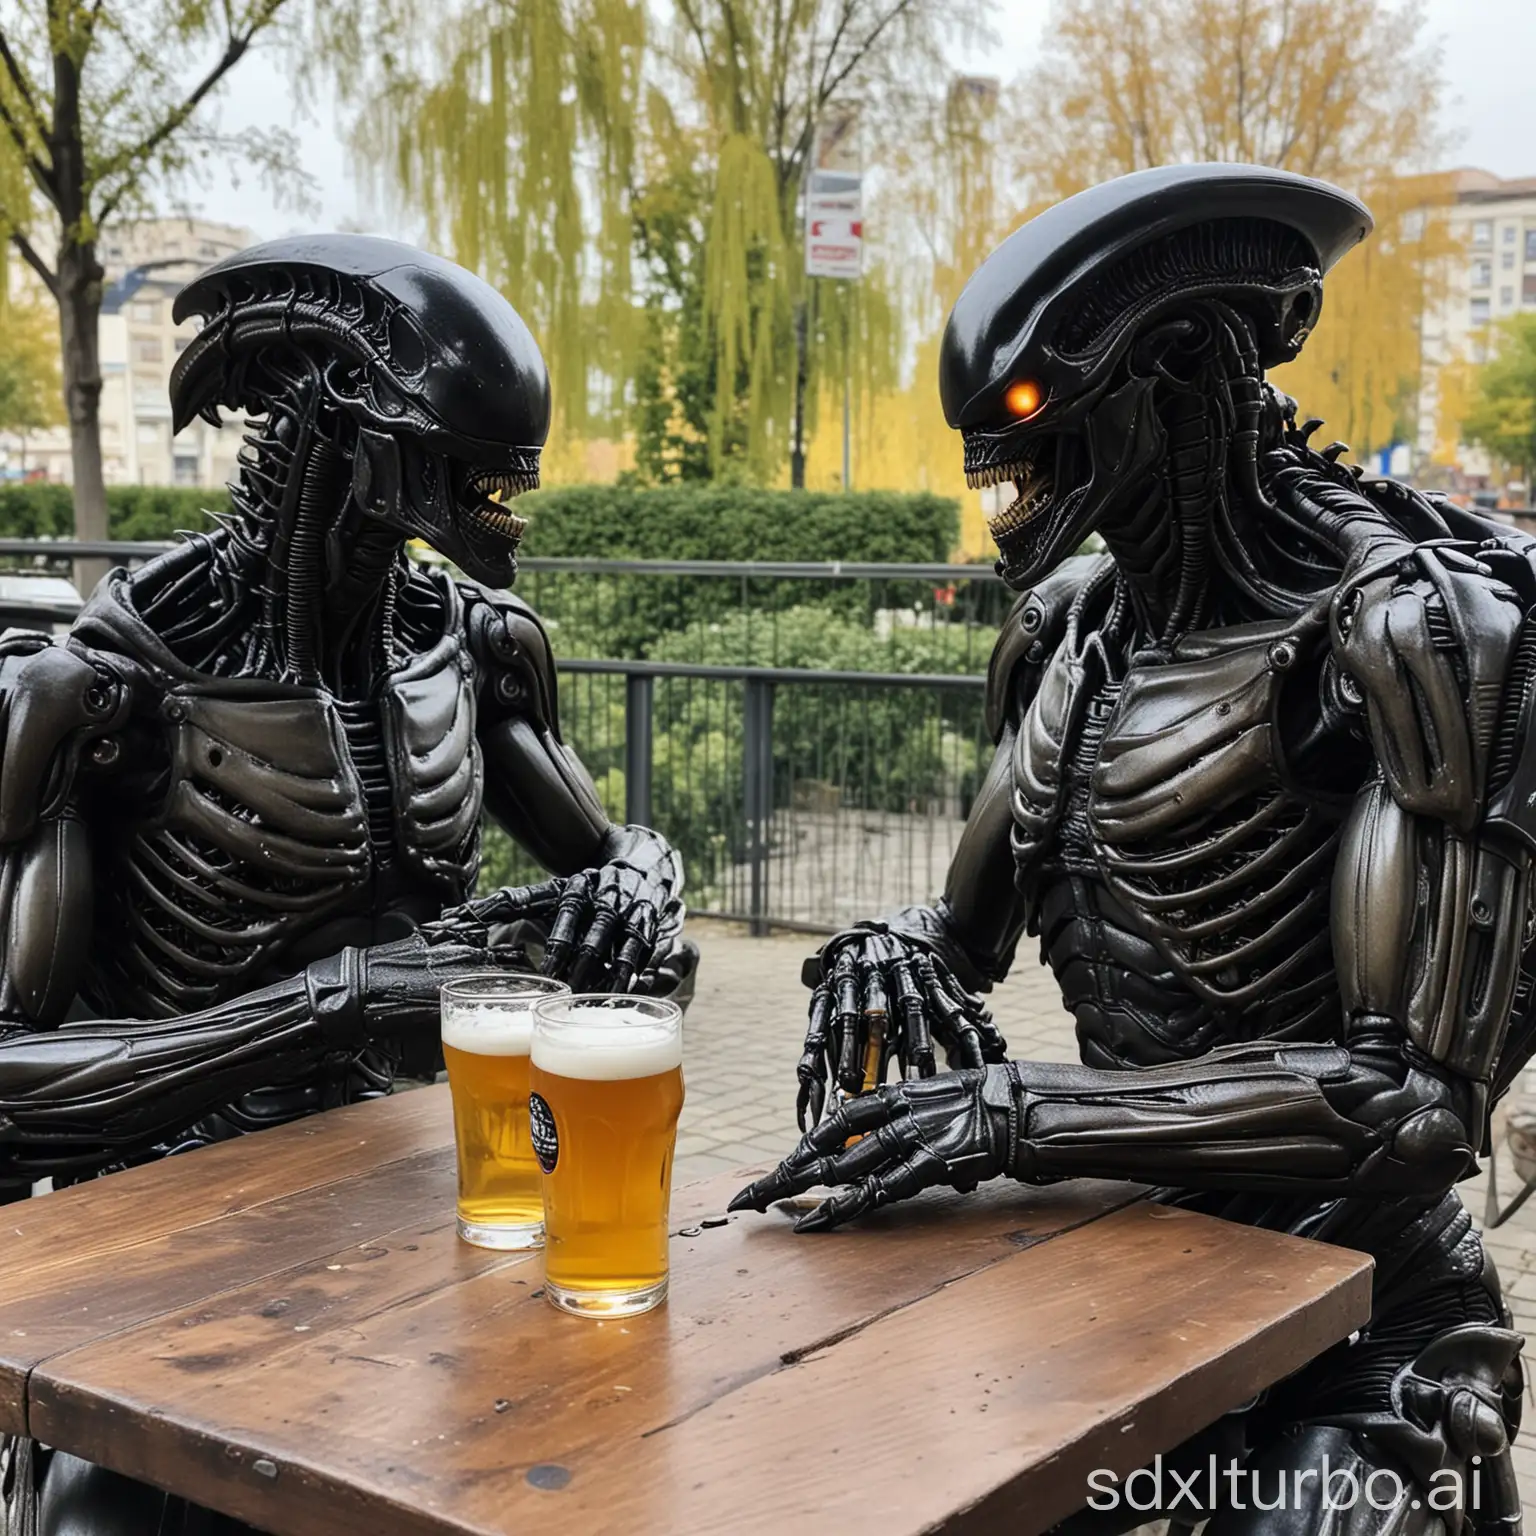 Real-T800-and-Xenomorph-Sharing-a-Beer-in-Bucharest